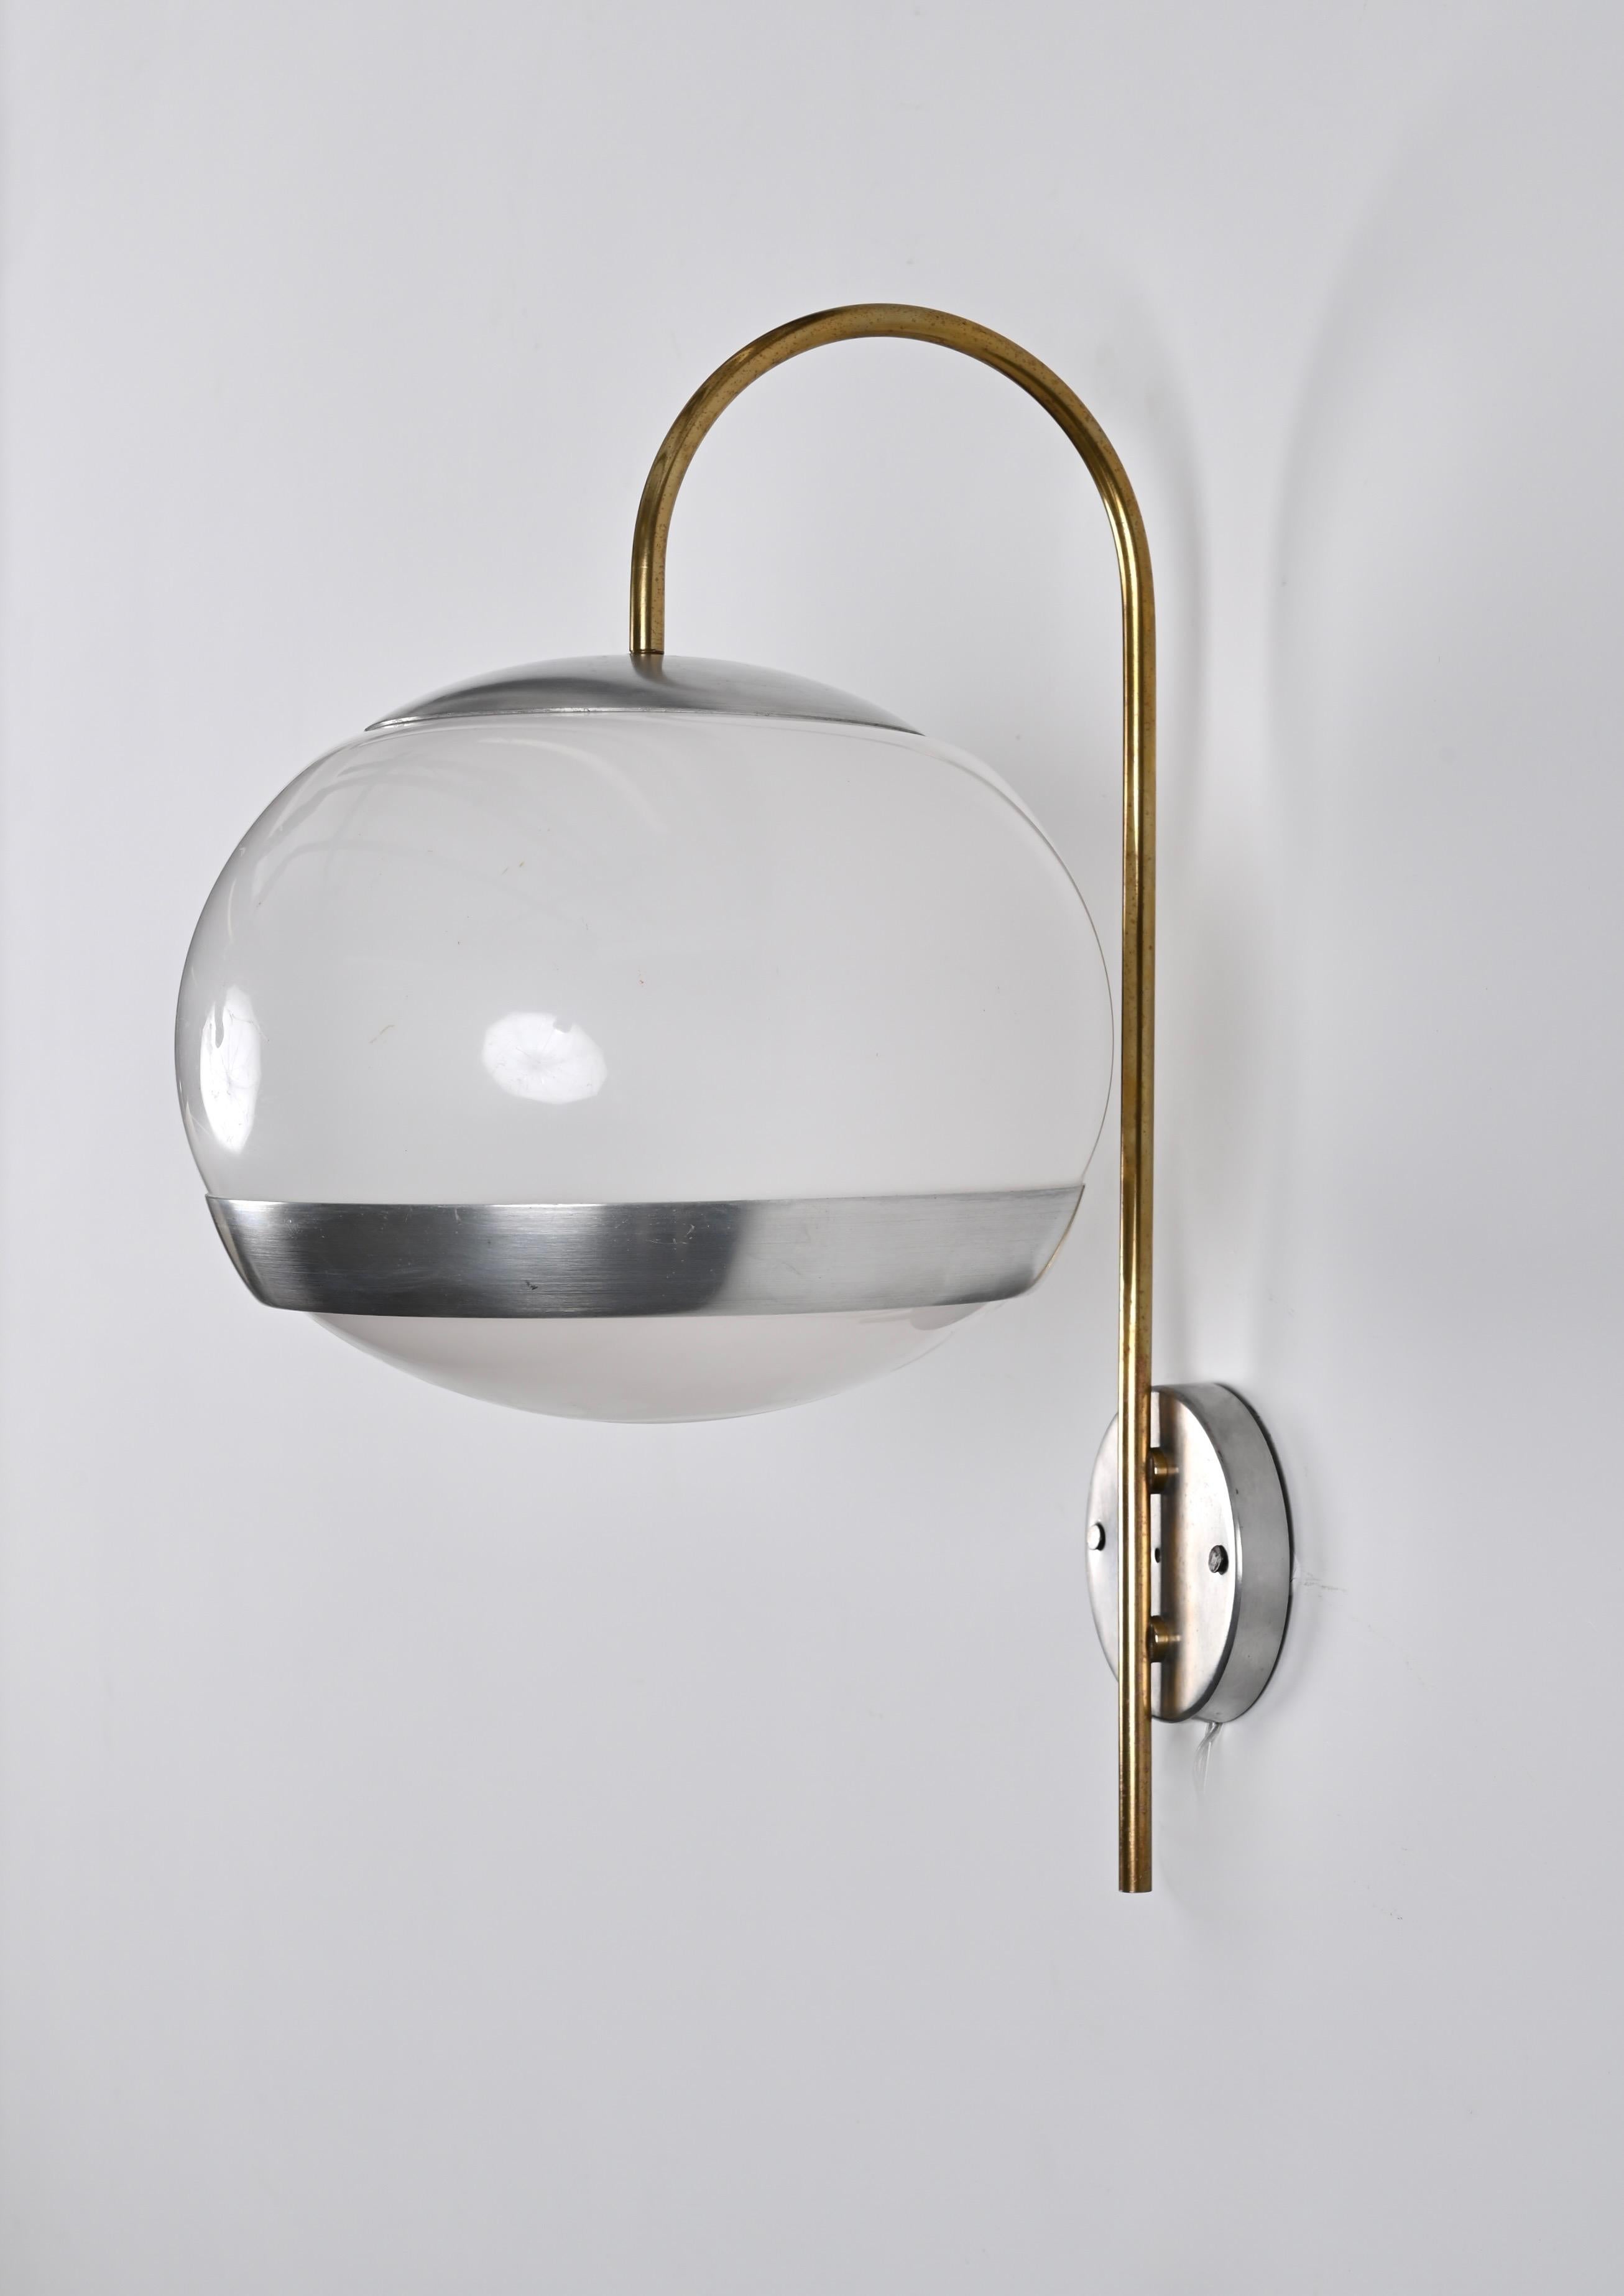 Wonderful pair of mid-century sconces in white white perspex, aluminum and brass, produced by Stilux in the 70s in Italy.

These beautiful wall lamps feature an elegant curved hook in brass that connects to a light ball in white plexiglass and